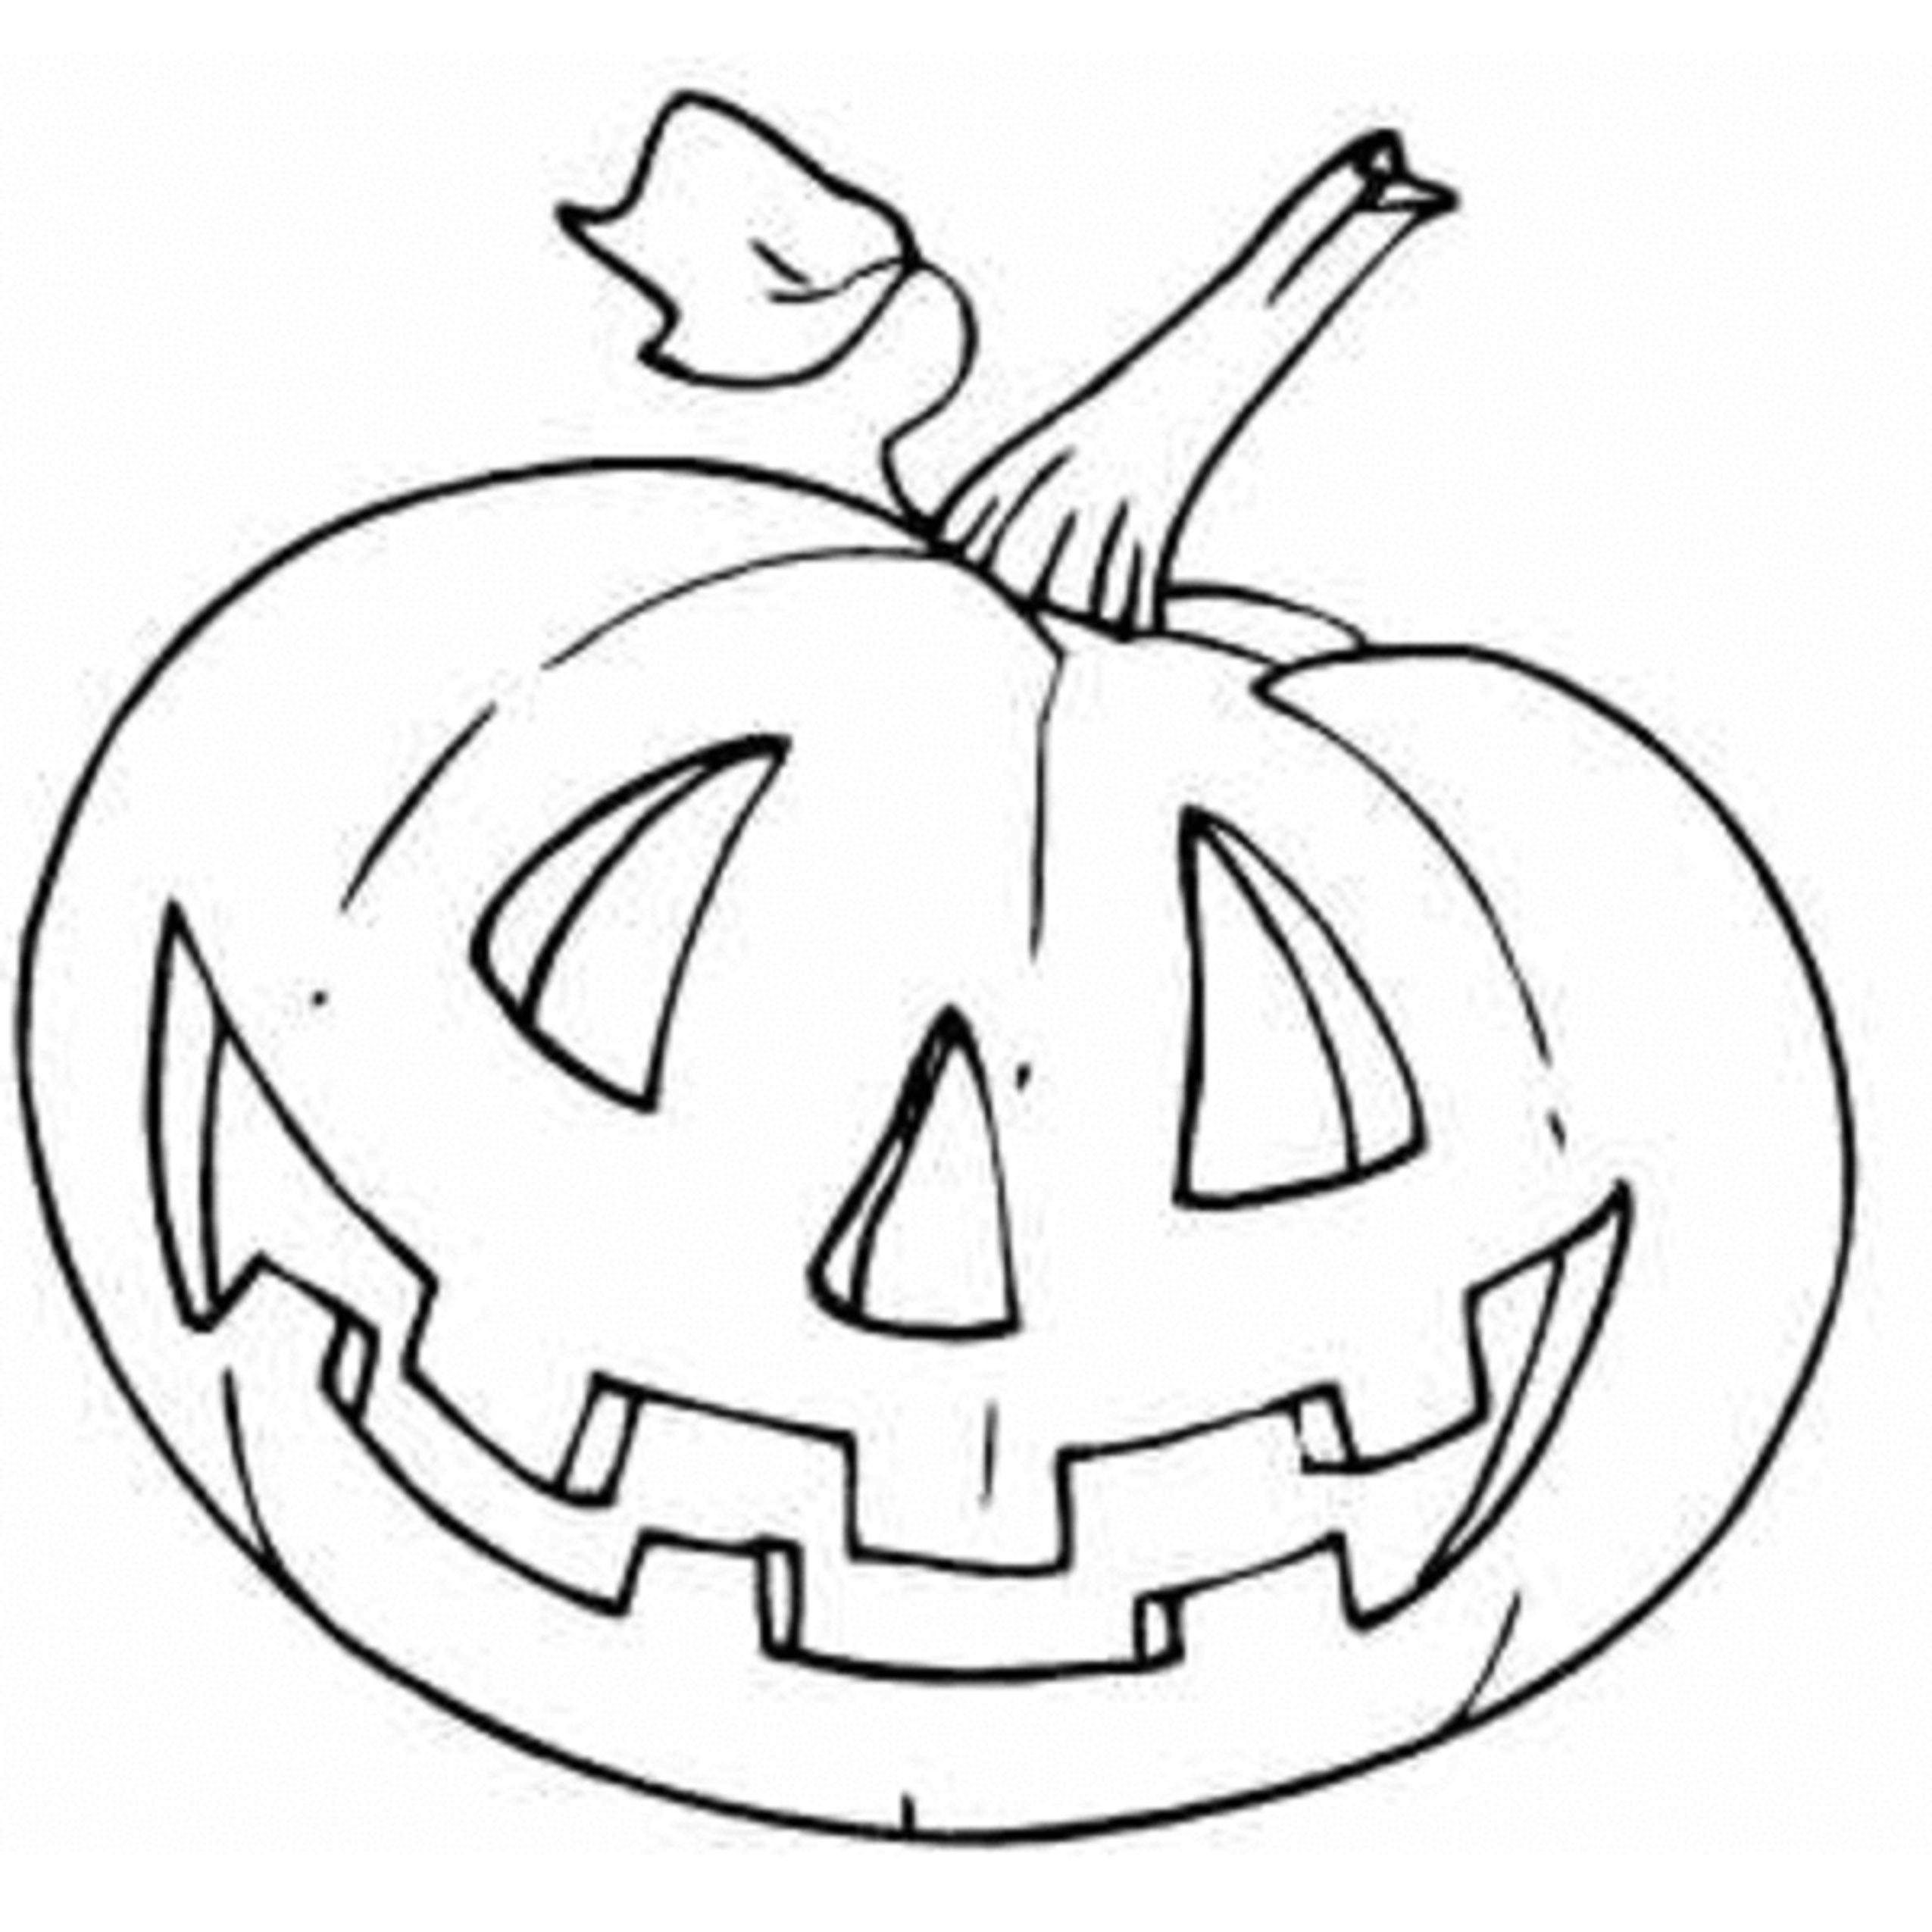 Drawing Pumpkin 166959 Objects Printable Coloring Pages